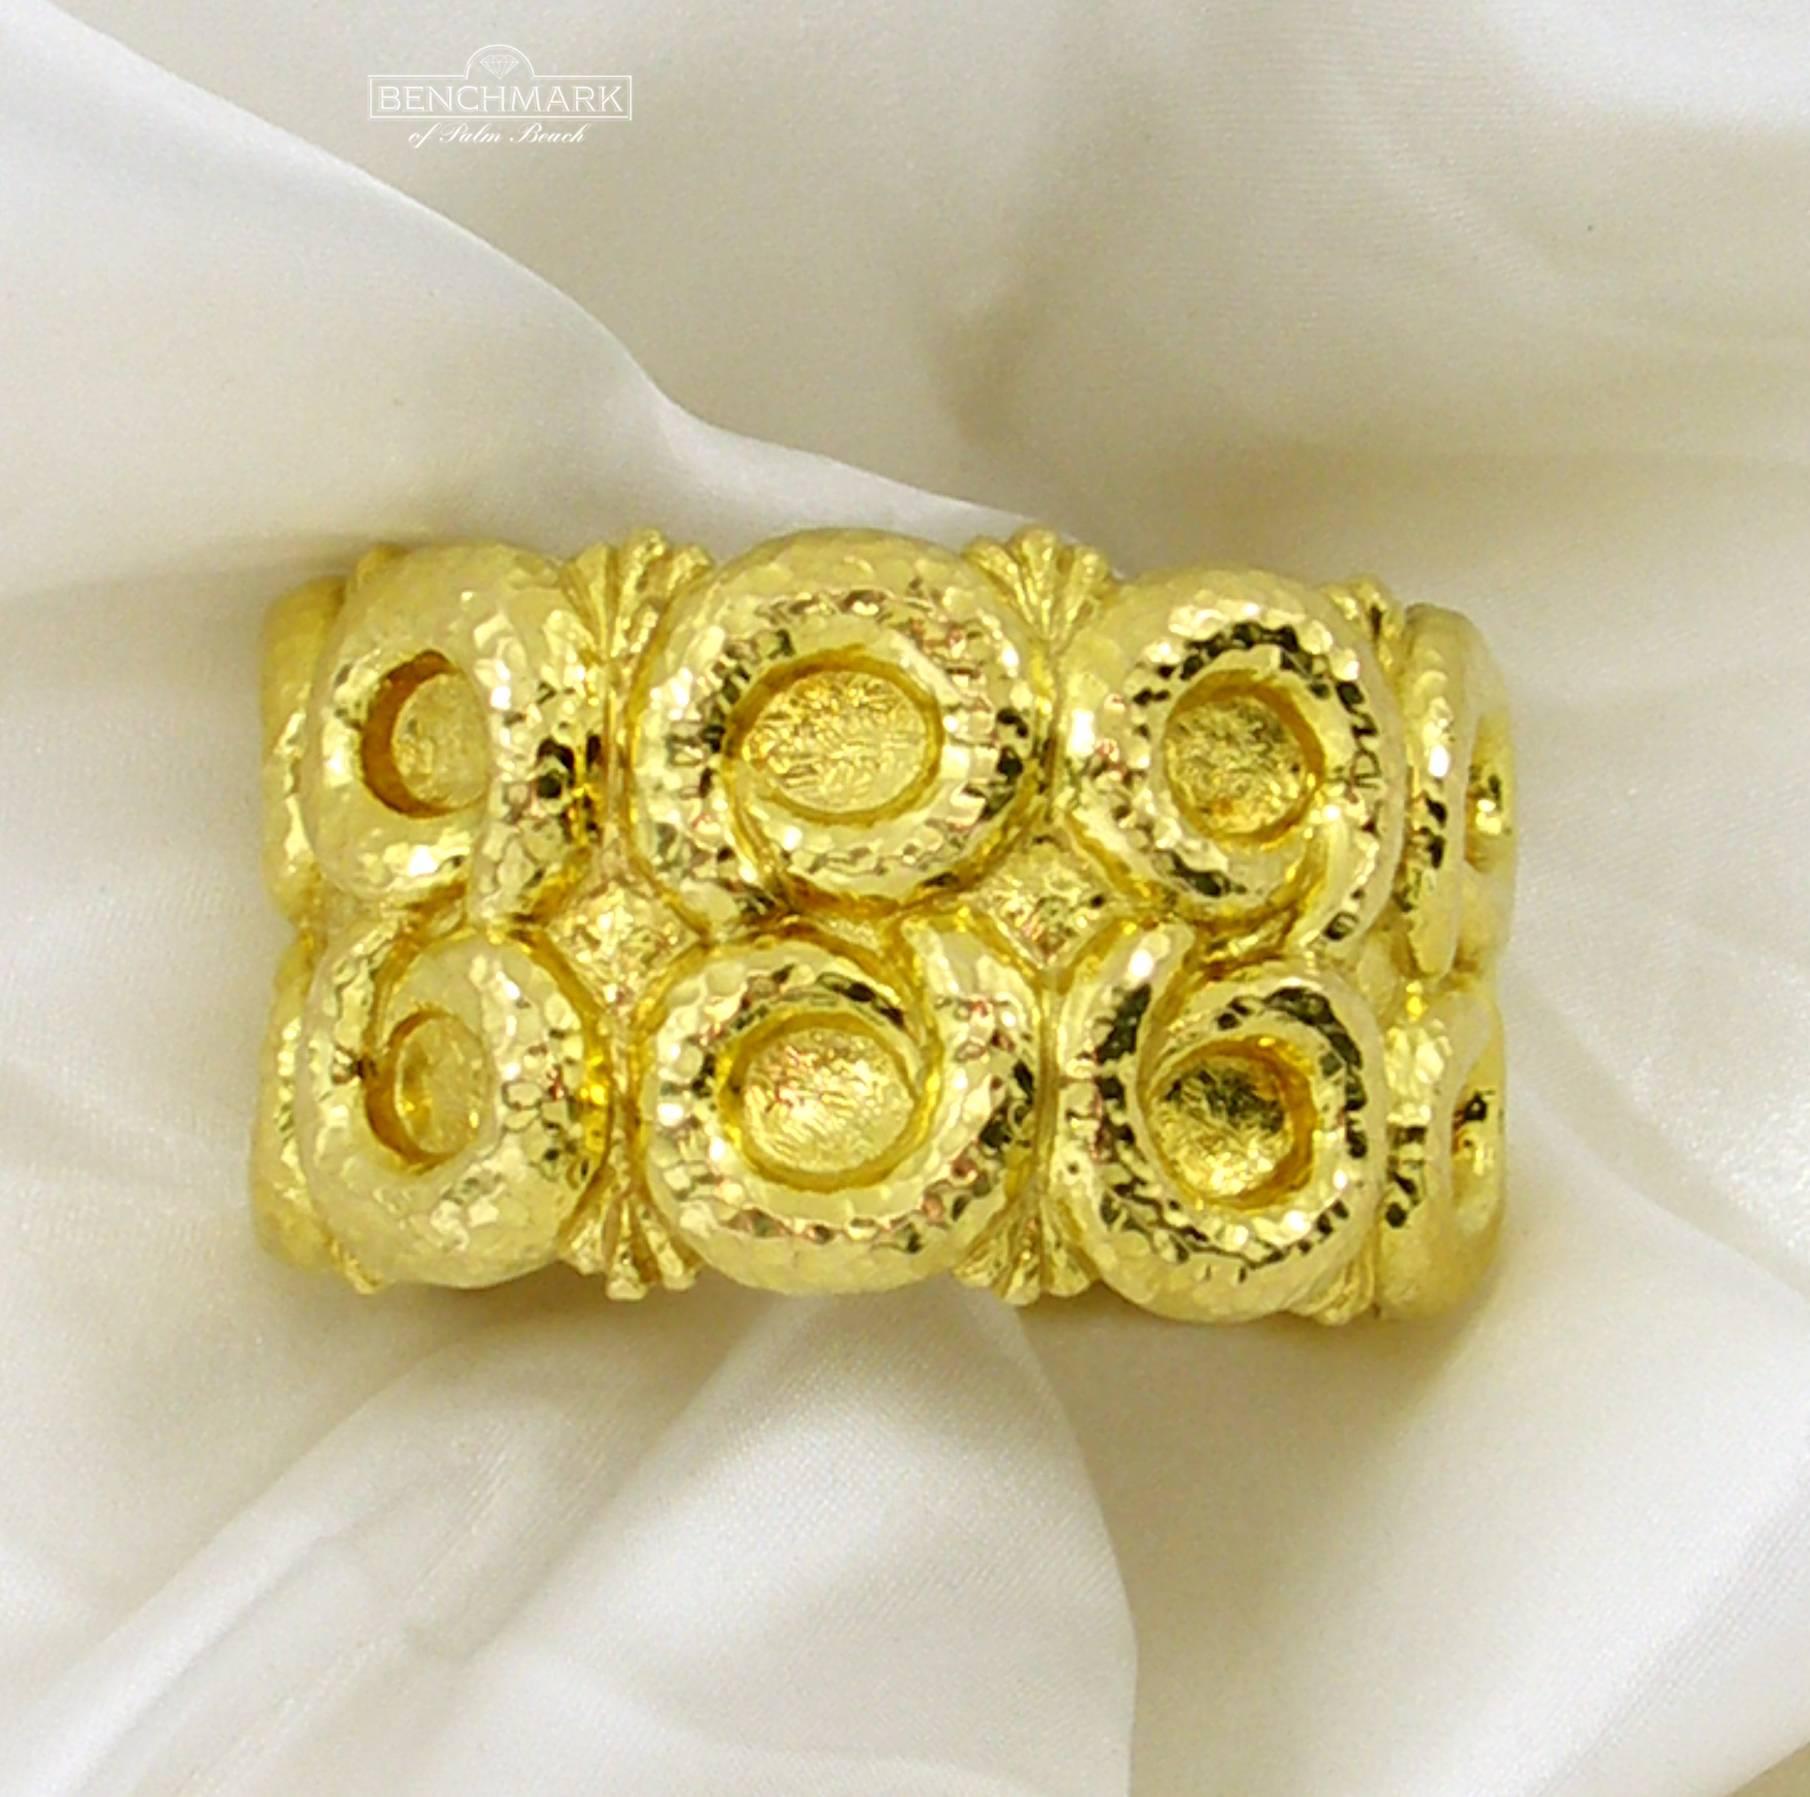 An 18 karat yellow gold bracelet measuring 1 1/2 inches wide, with two rows of Greek inspired design, it is hammer finished for a deep ancient look. In between the swirling shells are trident like motif, so that no design space is wasted. Signed